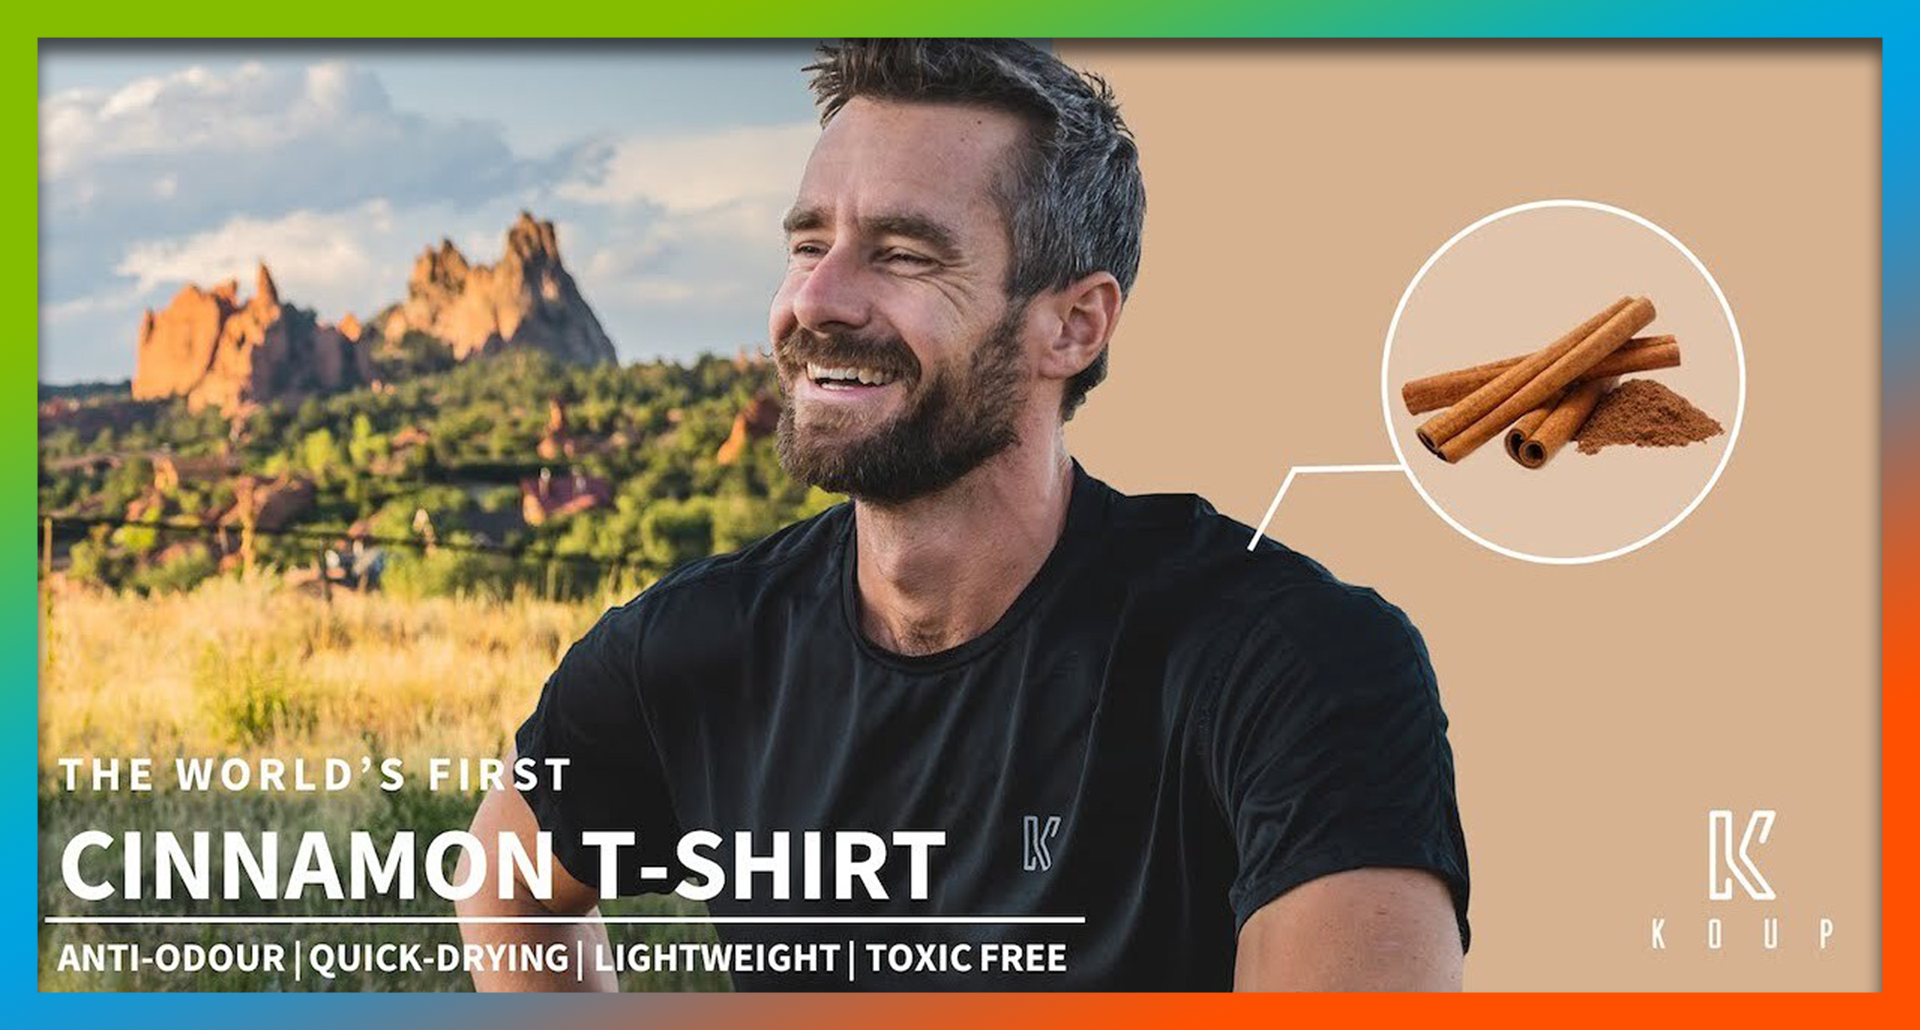 In the news: New Performance T-shirt Made With Cinnamon Stifles Odor